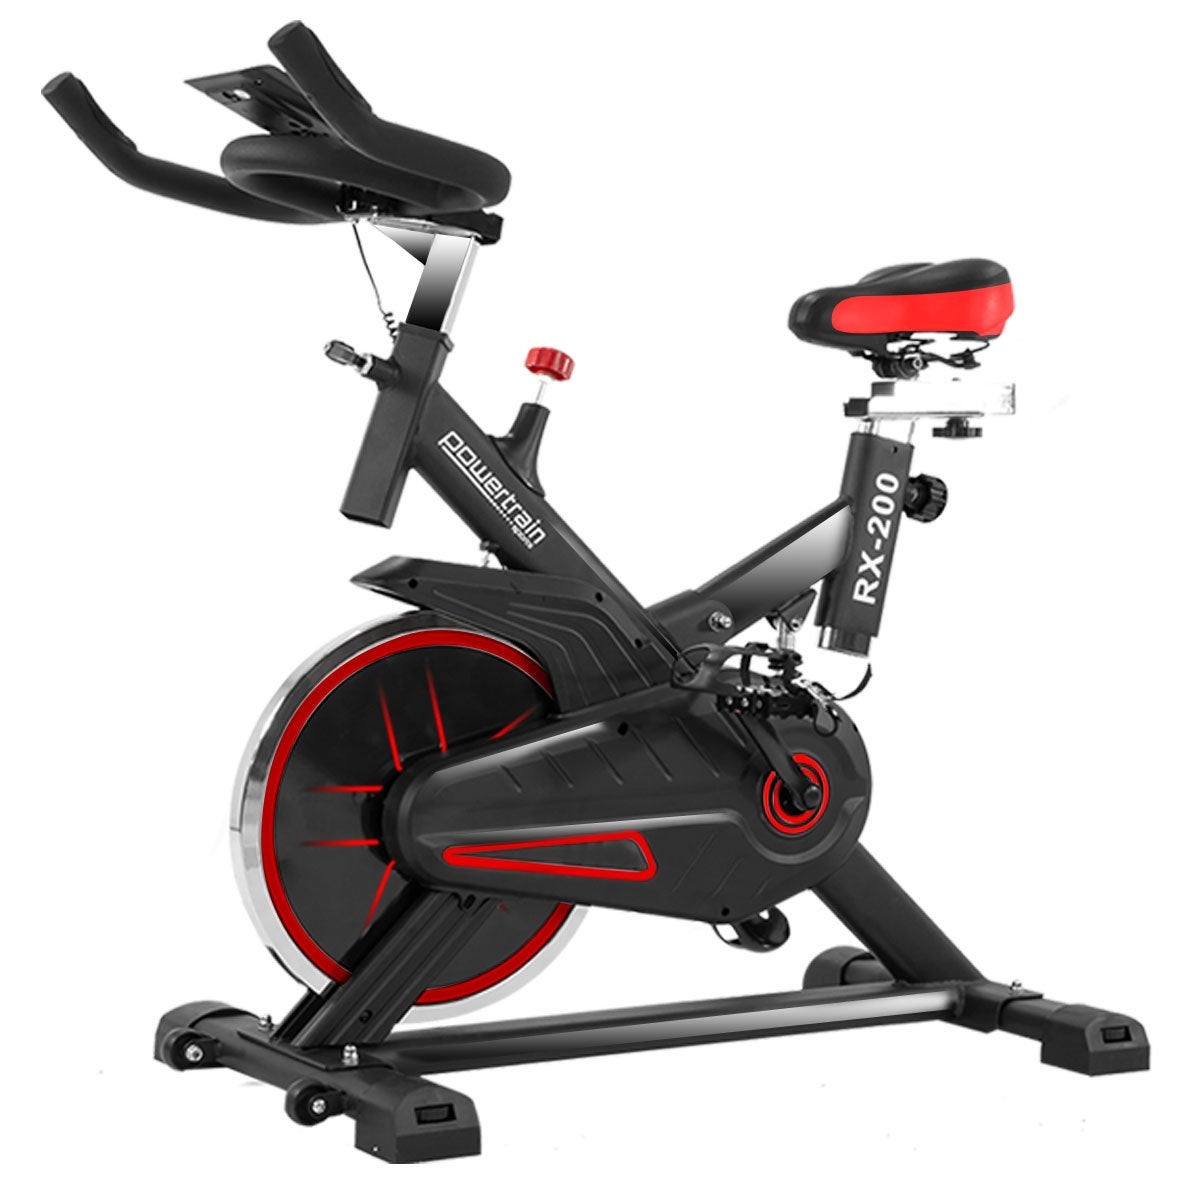 PowerTrain RX-200 Exercise Spin Bike Cardio Cycle Fitness Equipment - Red